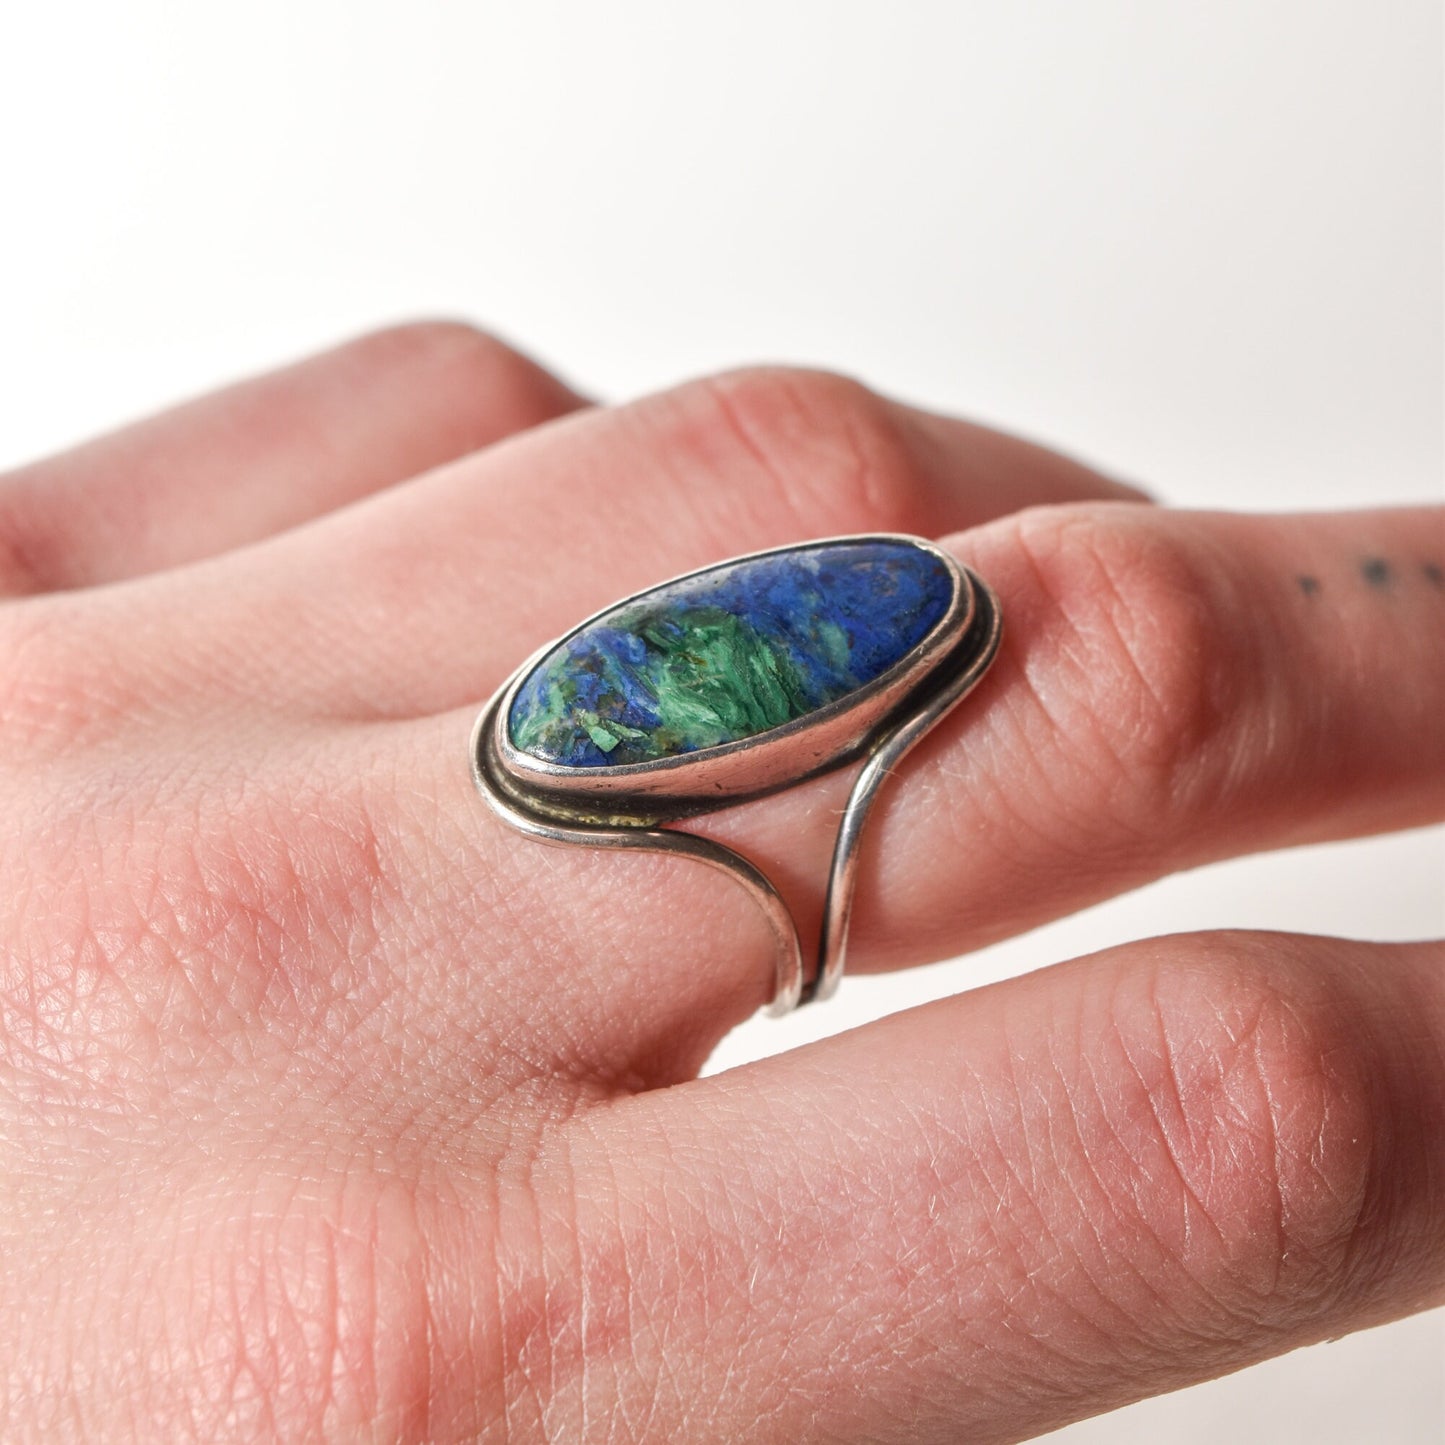 Modernist Sterling Silver Azurite Ring, Gemstone Jewelry, Size 7 1/2 US